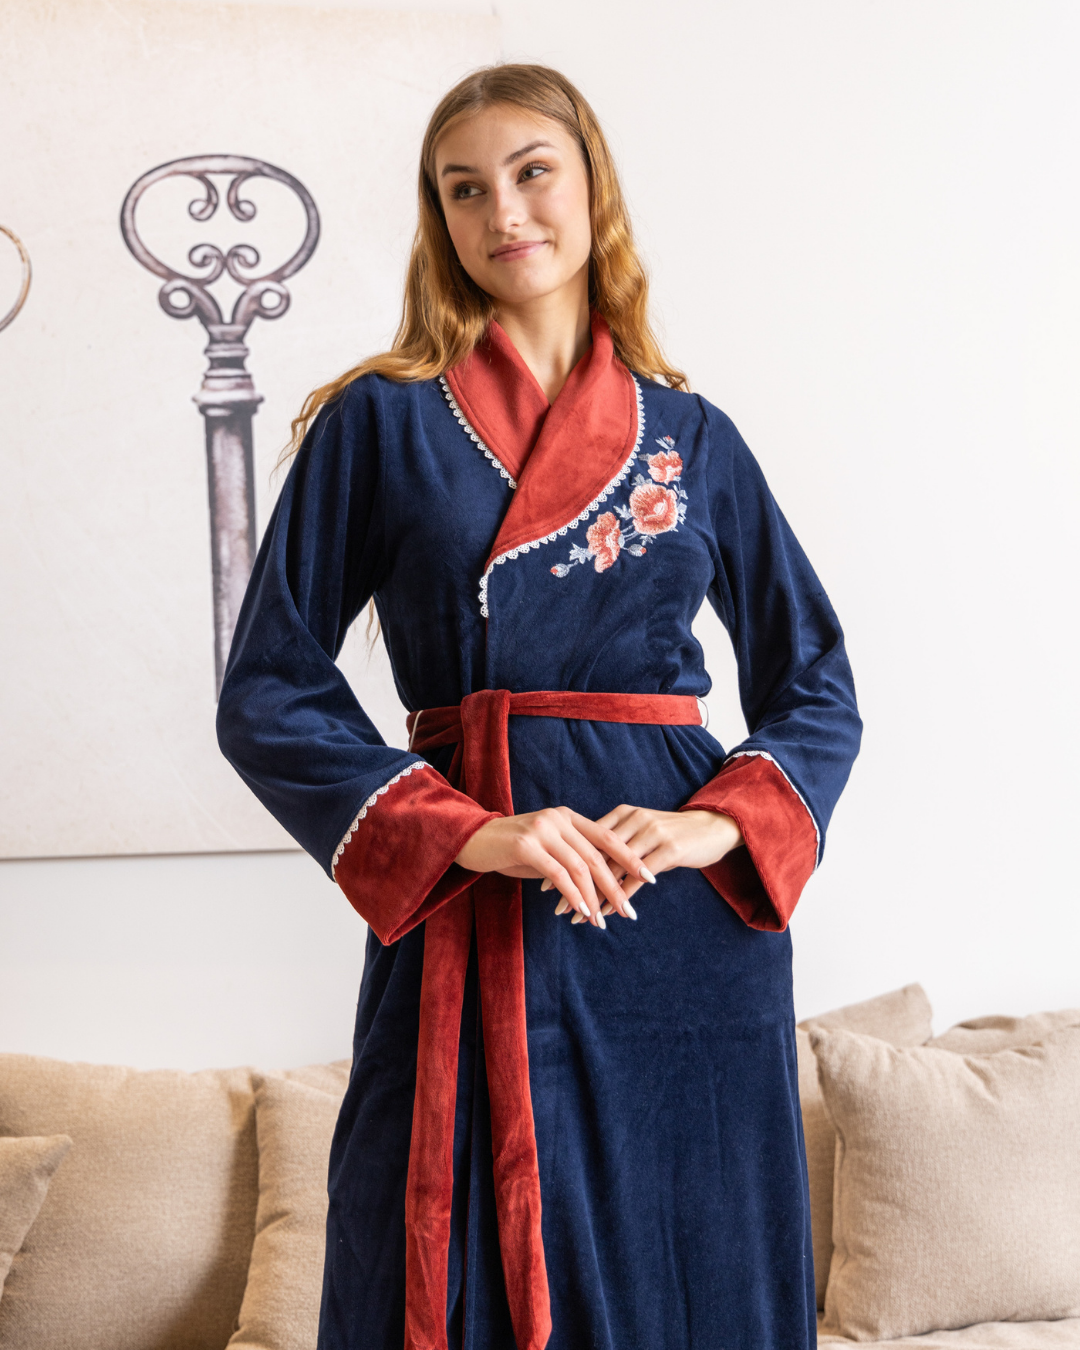 Women's robe, cool velor, embroidered shawl